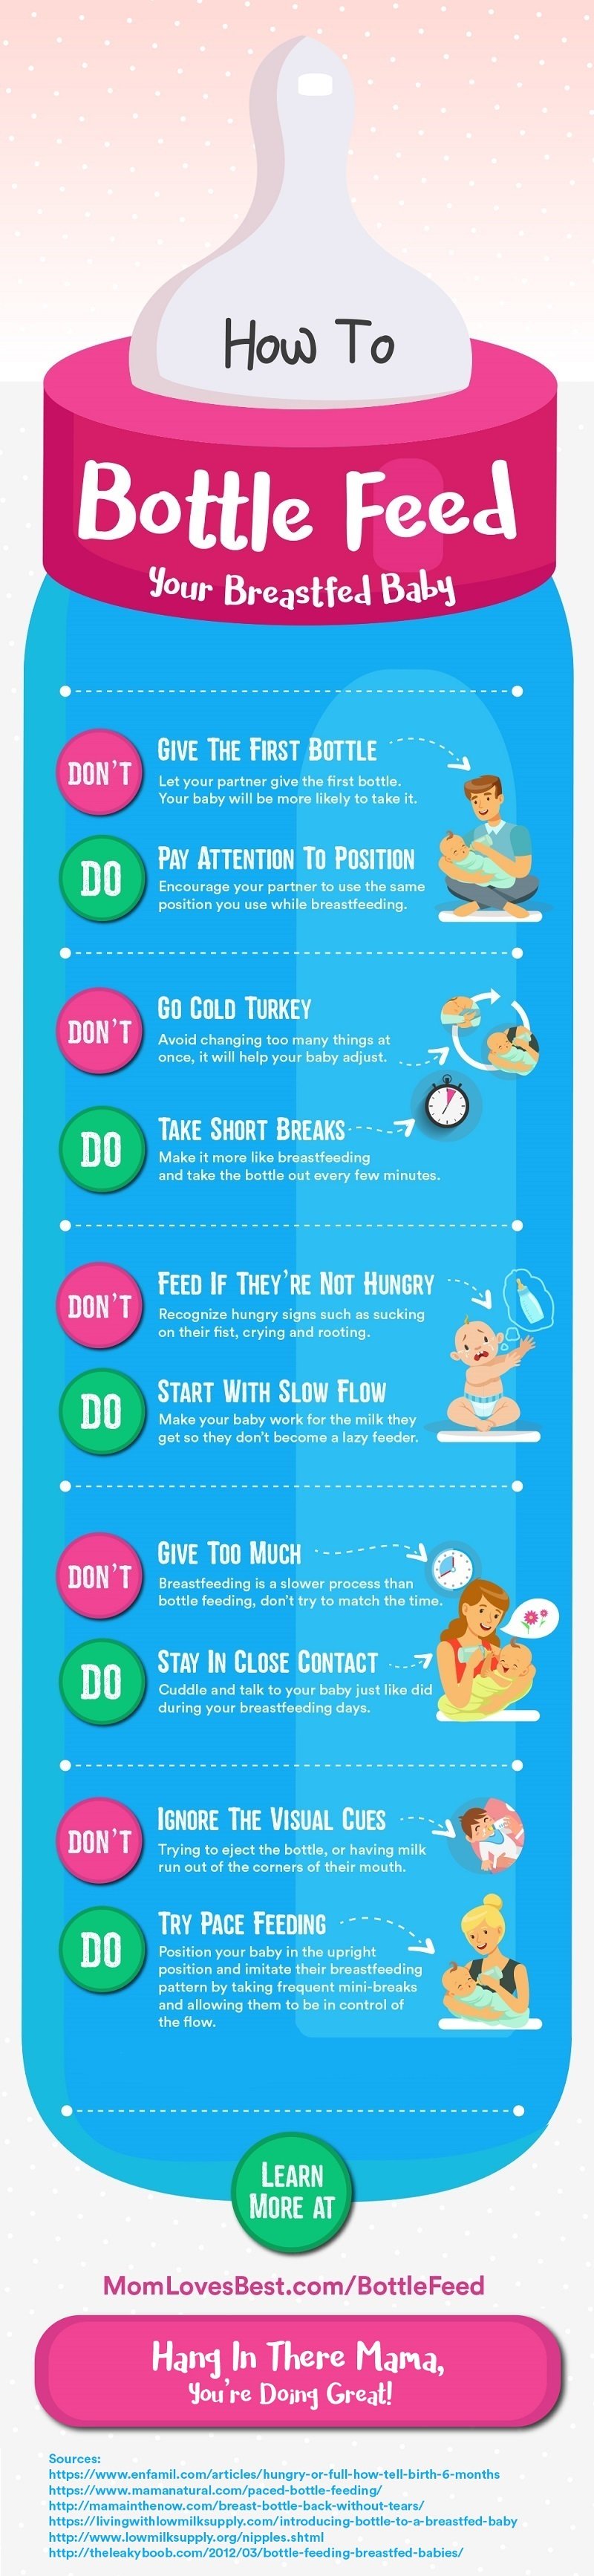 How to Bottle Feed Your Breastfed Baby - The Ultimate Guide